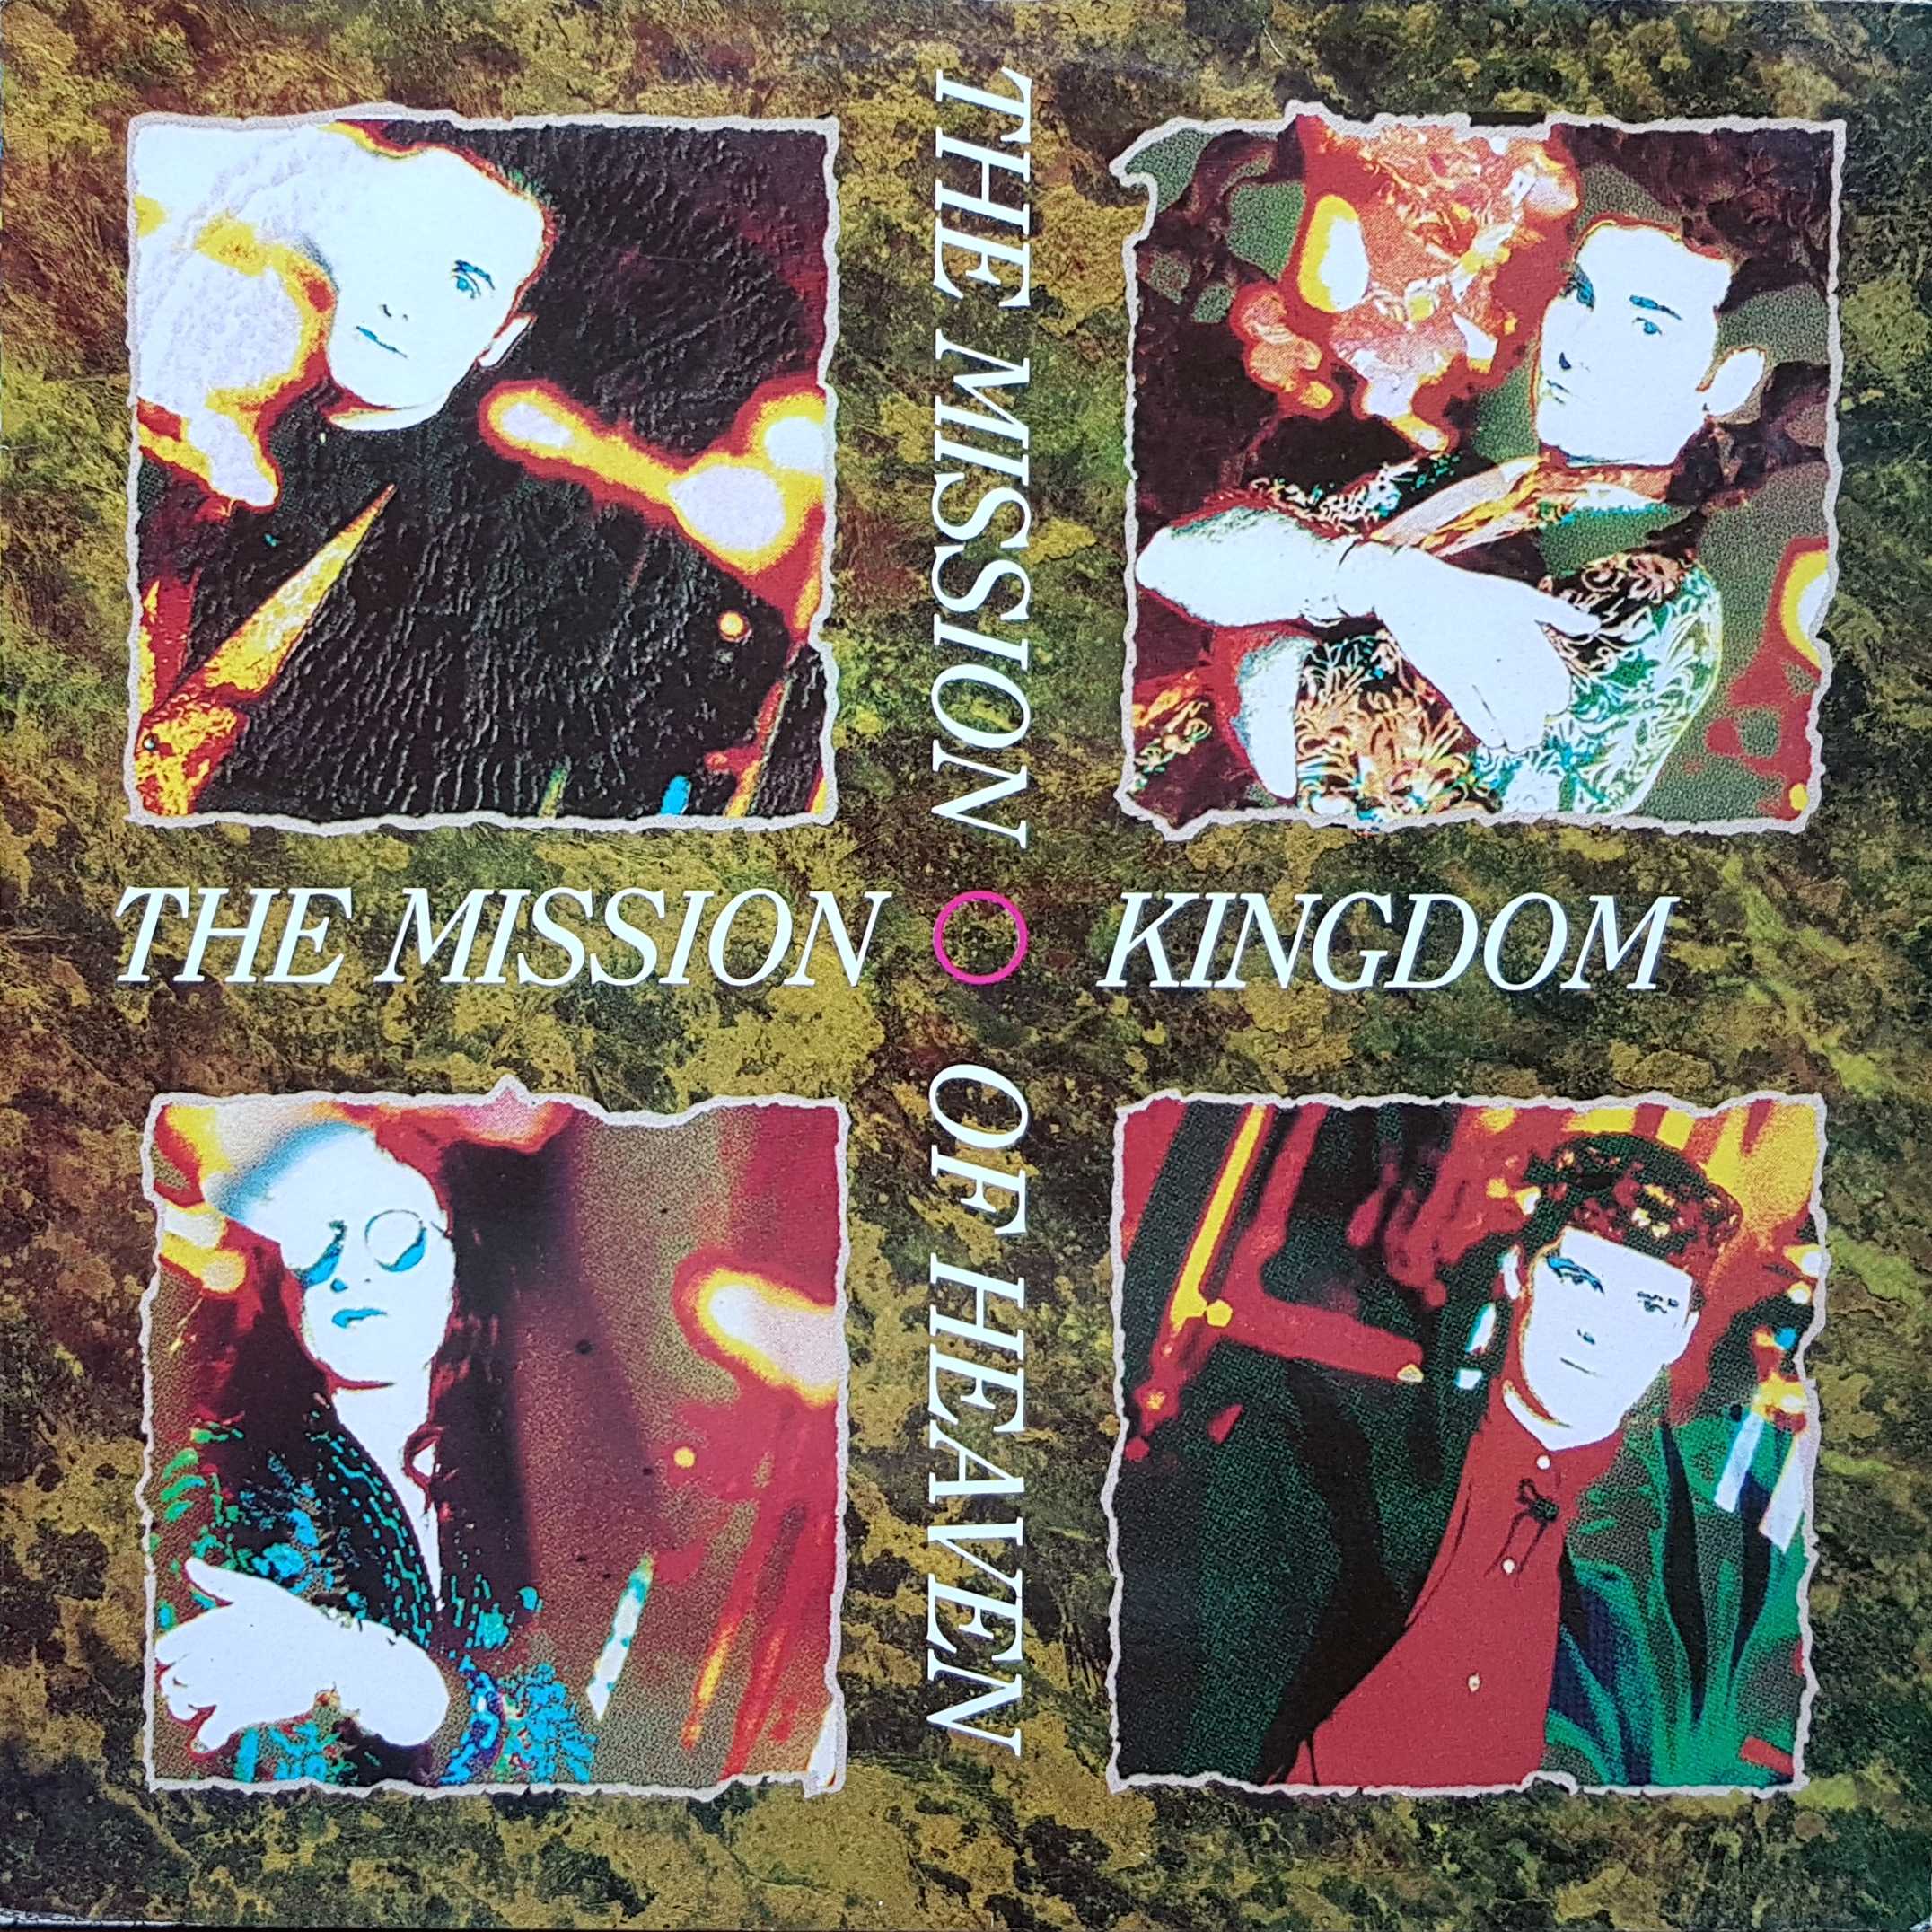 Picture of CN 5294 S The Mission - In concert 452 (Re-issue) by artist The Mission from the BBC records and Tapes library